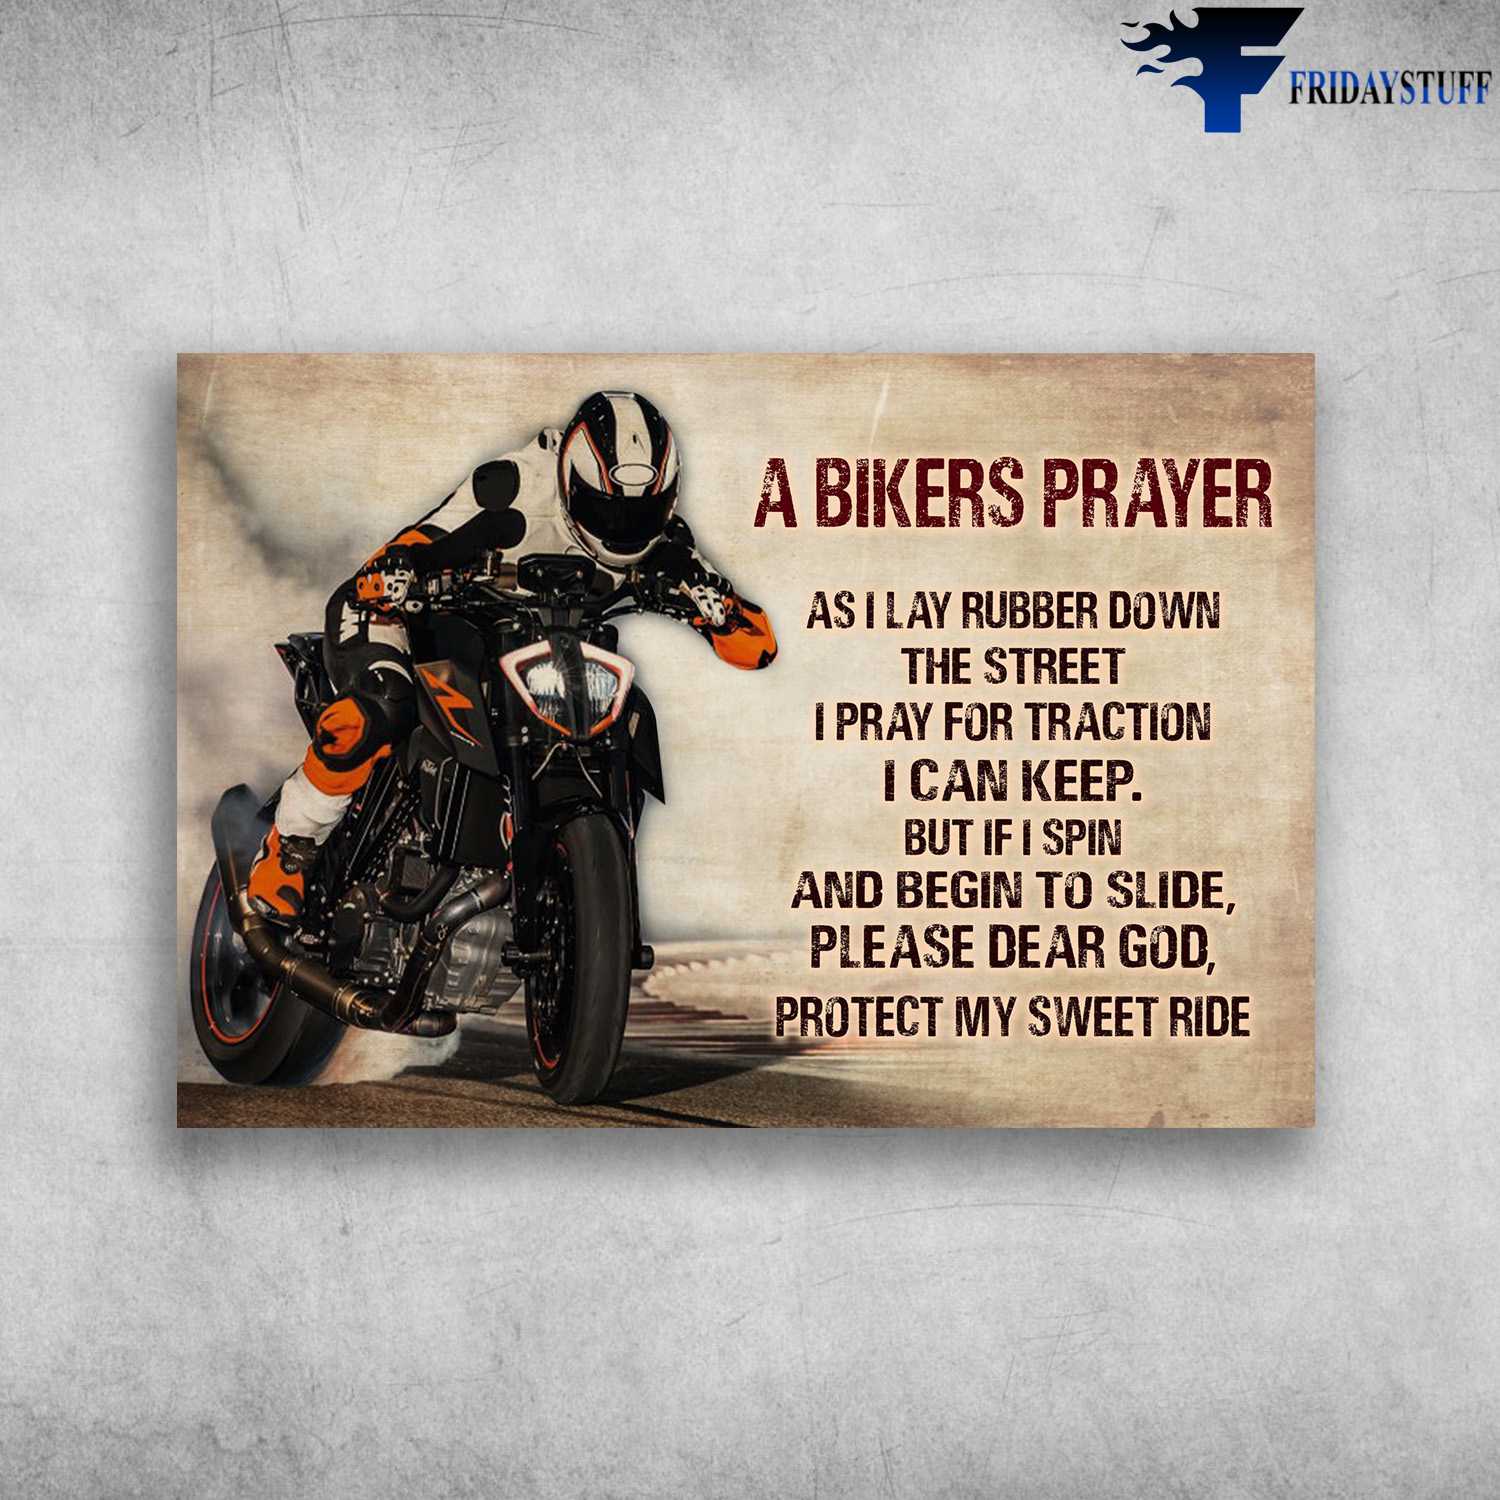 Motorcycle Man, Biker Lover - A Bikers Prayer, As I Lay Bunner Down The Street, I Pray For Traction I Can Keep, But If I Spin And Begin To Slide, Please Dear God, Protect My Sweet Ride